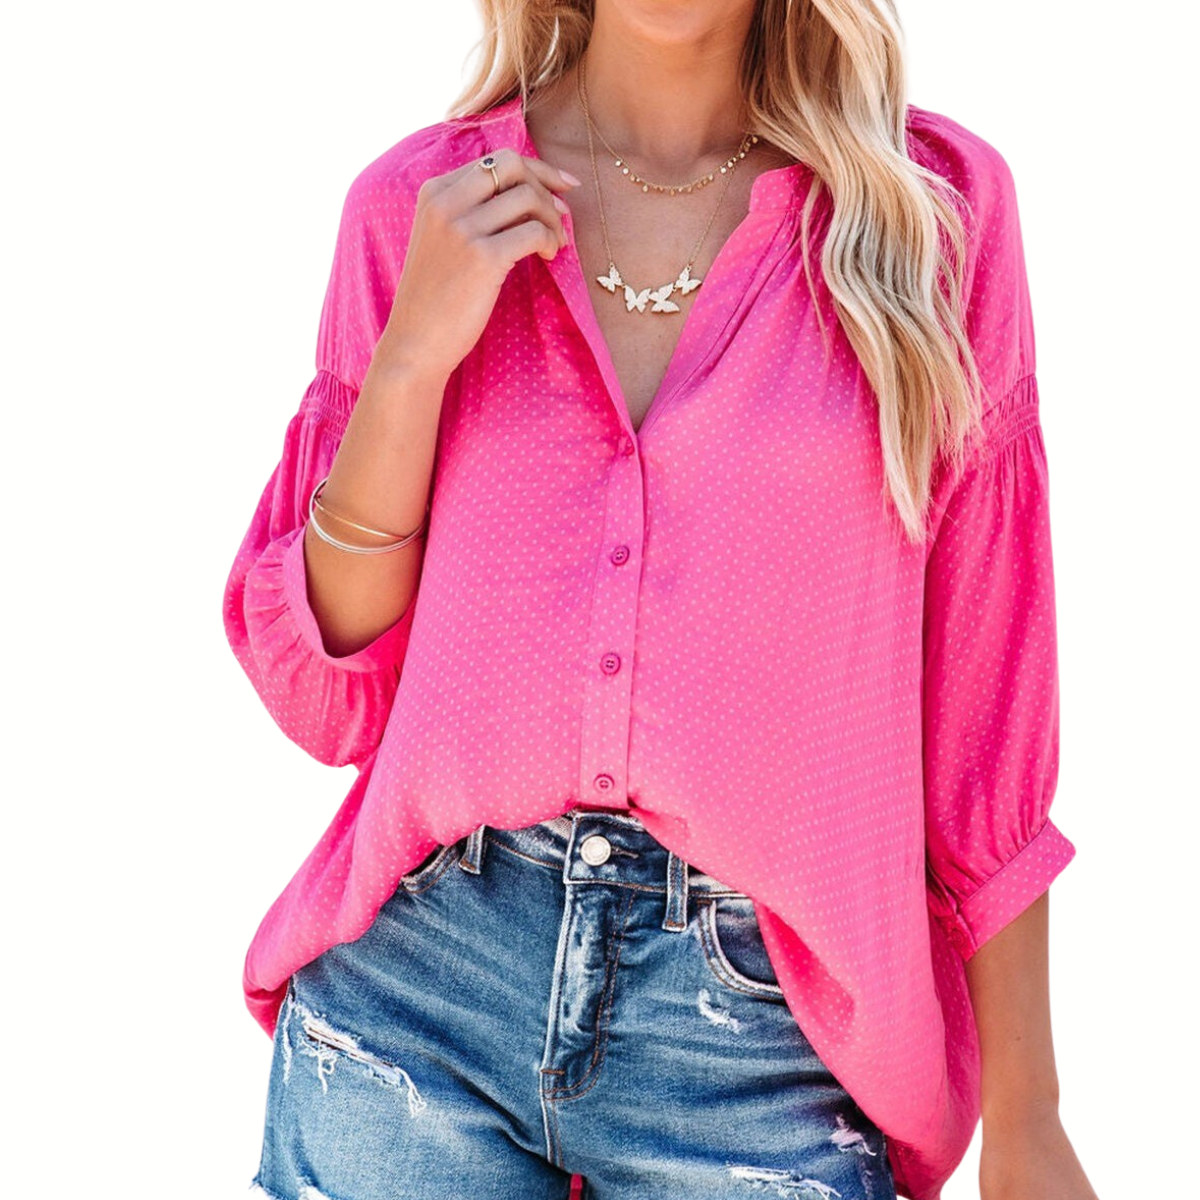 A woman wearing a Think Pink Dotted Shirred Blouse with a V neckline and denim shorts by FASHION GO.